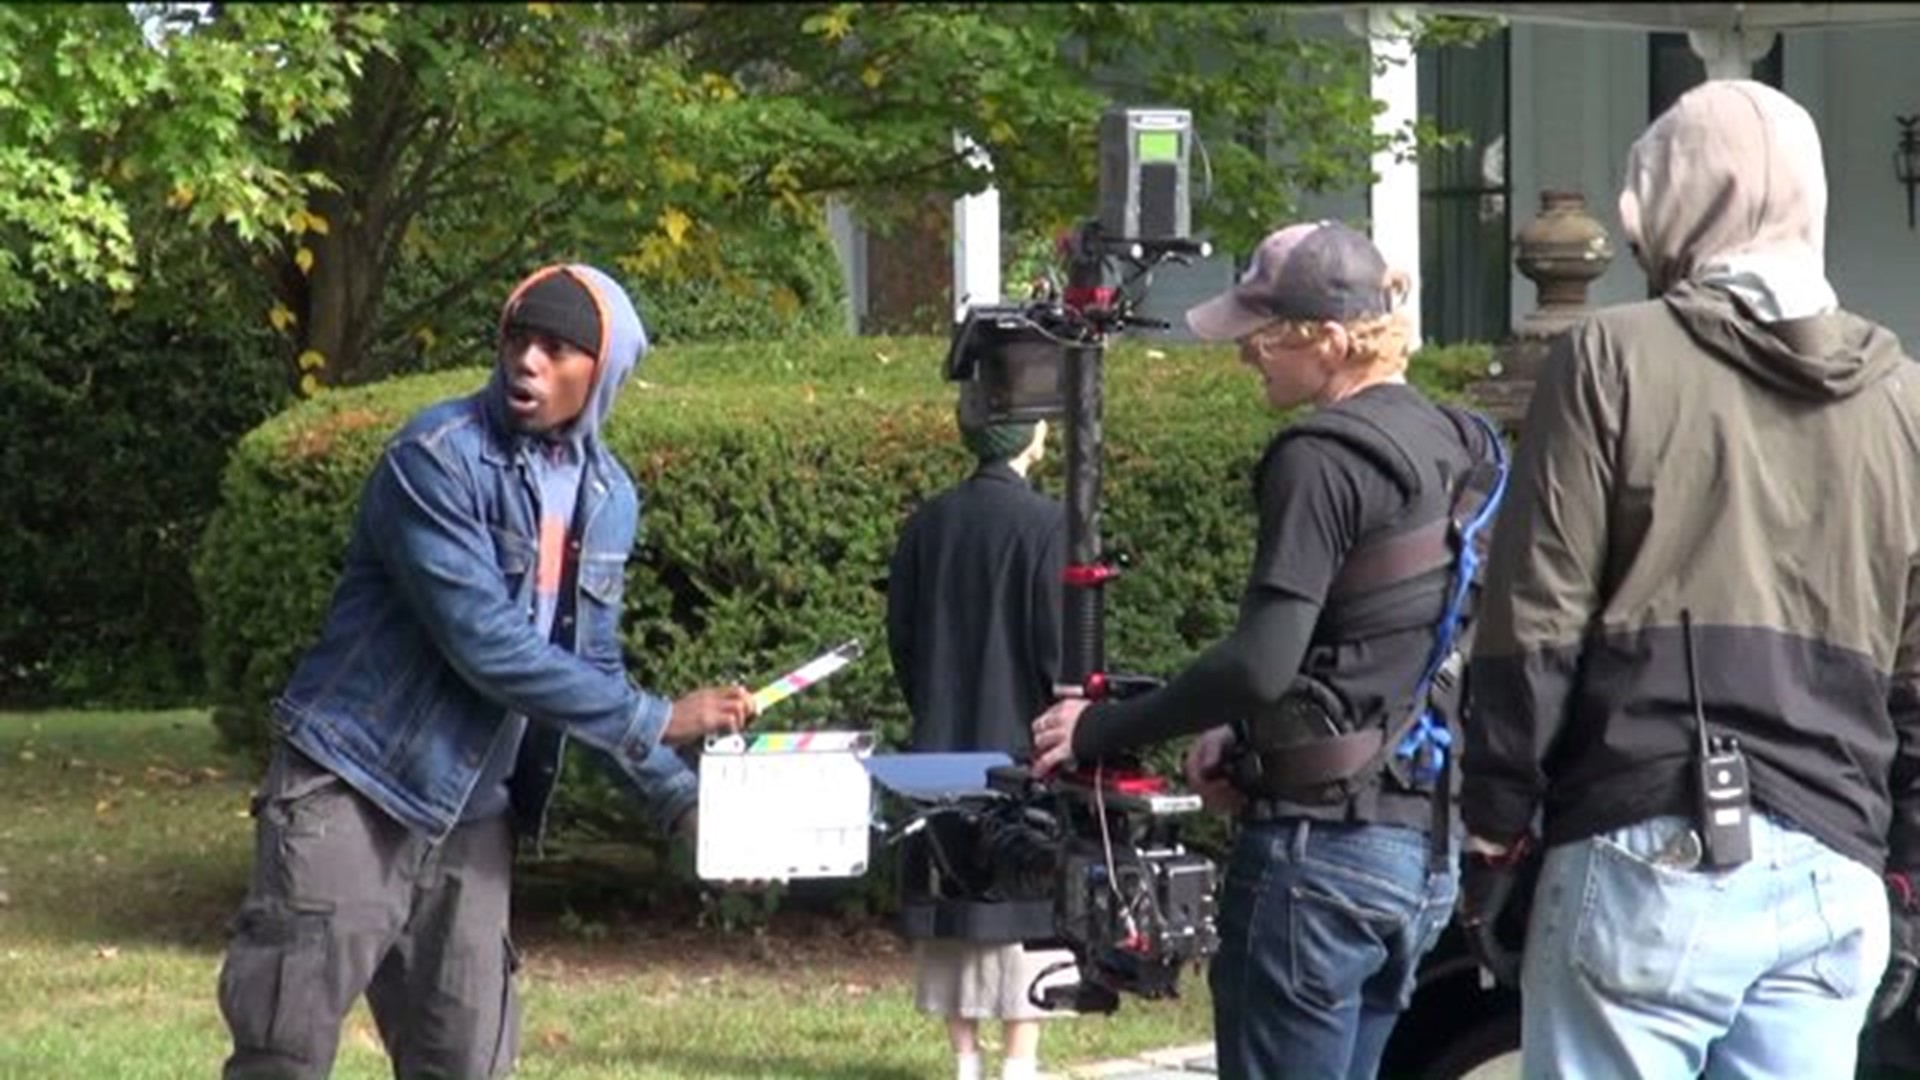 New Film Set To Shoot in Milford